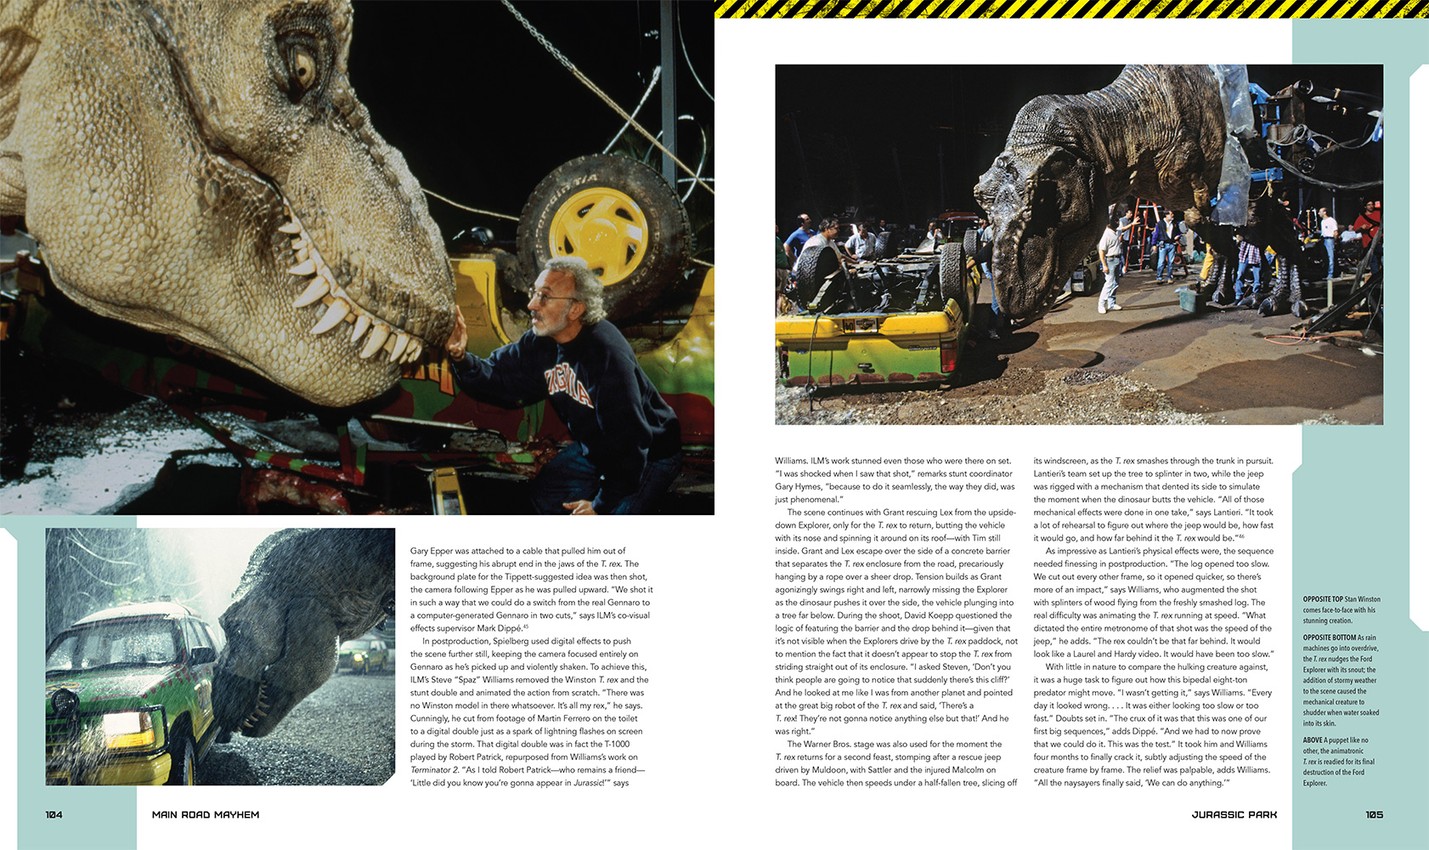 Jurassic Park: The Ultimate Visual History- Prototype Shown